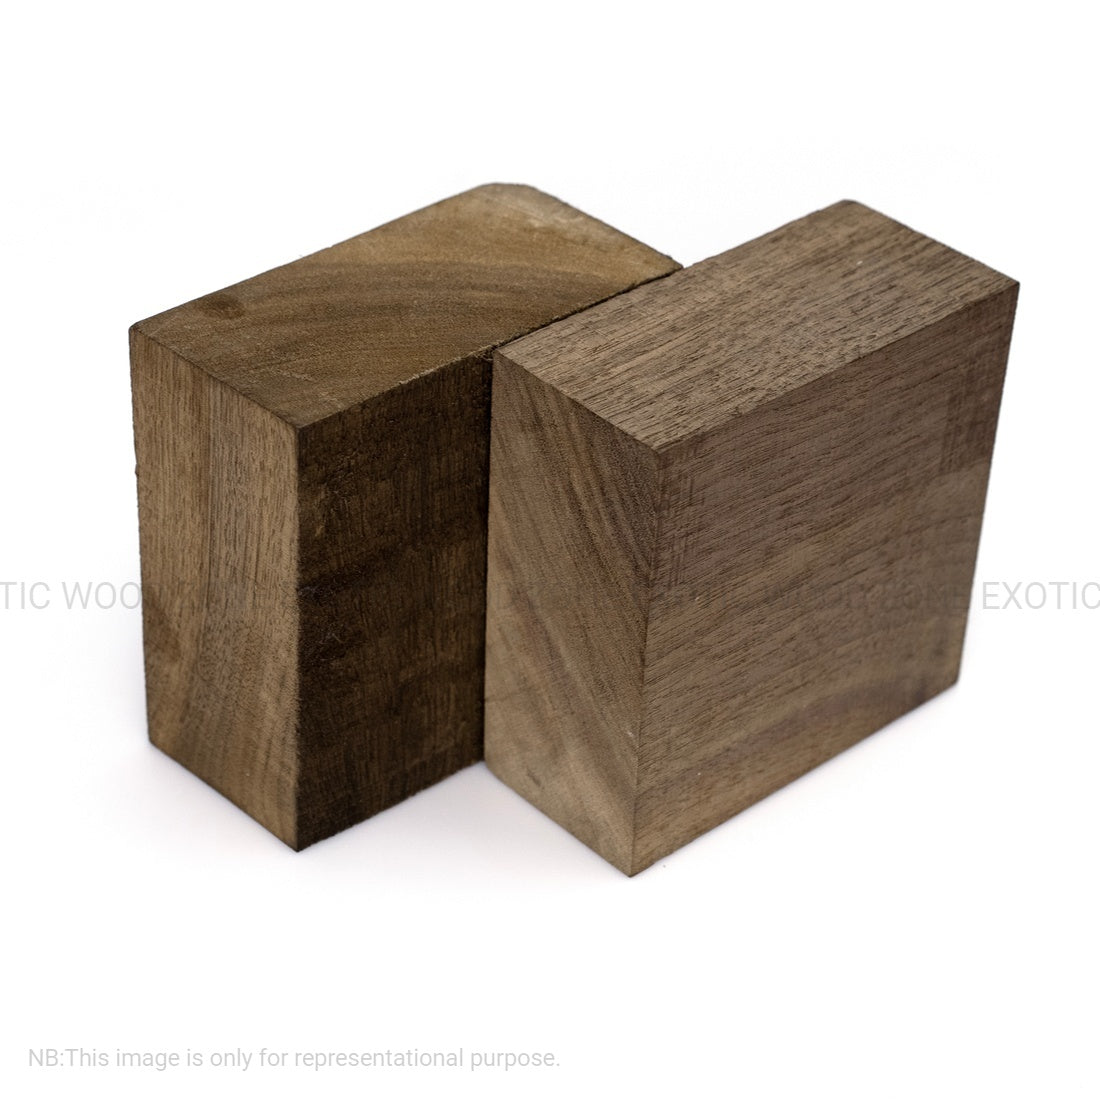 Pack of 2, American Walnut Wood Bowl Blanks 4&quot; x 4&quot; x 2&quot; - Exotic Wood Zone - Buy online Across USA 